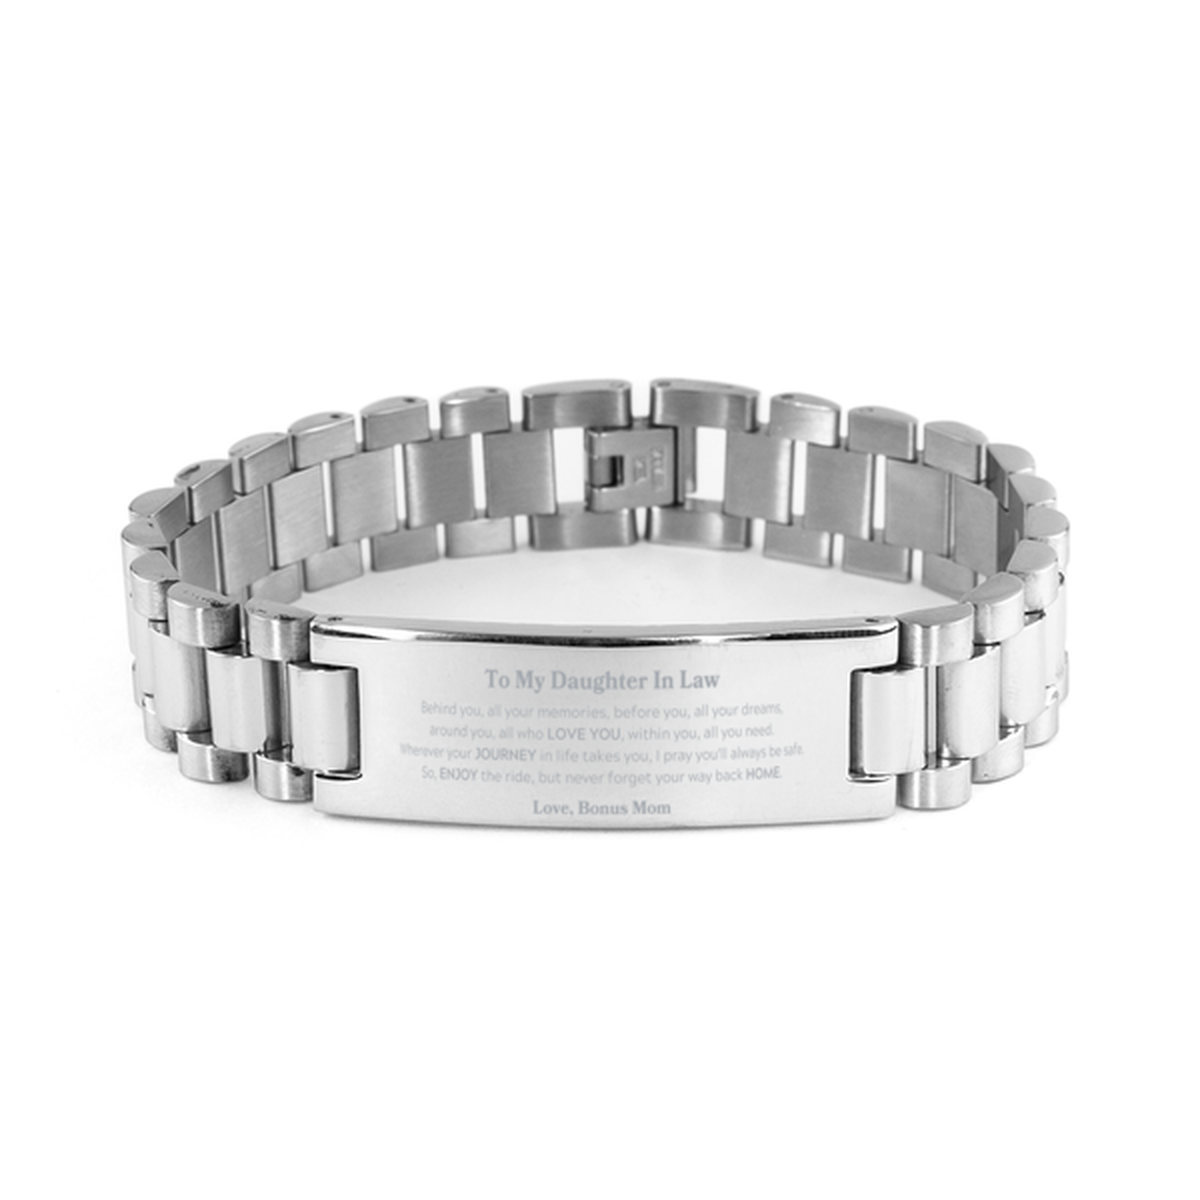 To My Daughter In Law Graduation Gifts from Bonus Mom, Daughter In Law Ladder Stainless Steel Bracelet Christmas Birthday Gifts for Daughter In Law Behind you, all your memories, before you, all your dreams. Love, Bonus Mom